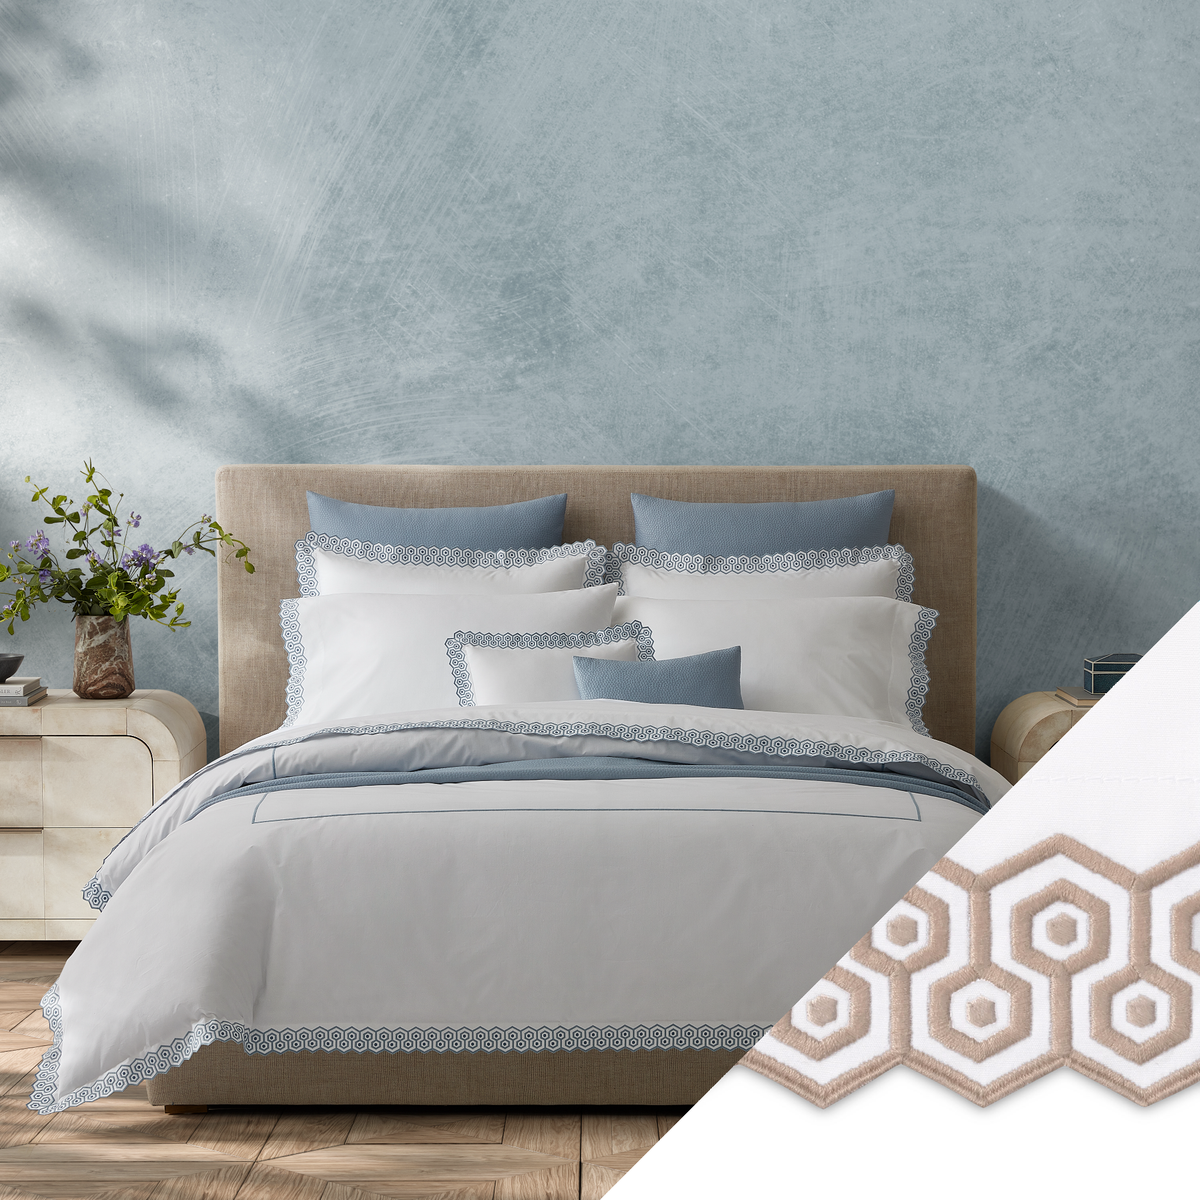 Full Bed Dressed in Matouk Felix Bedding in Hazy Blue Color with Dune Swatch